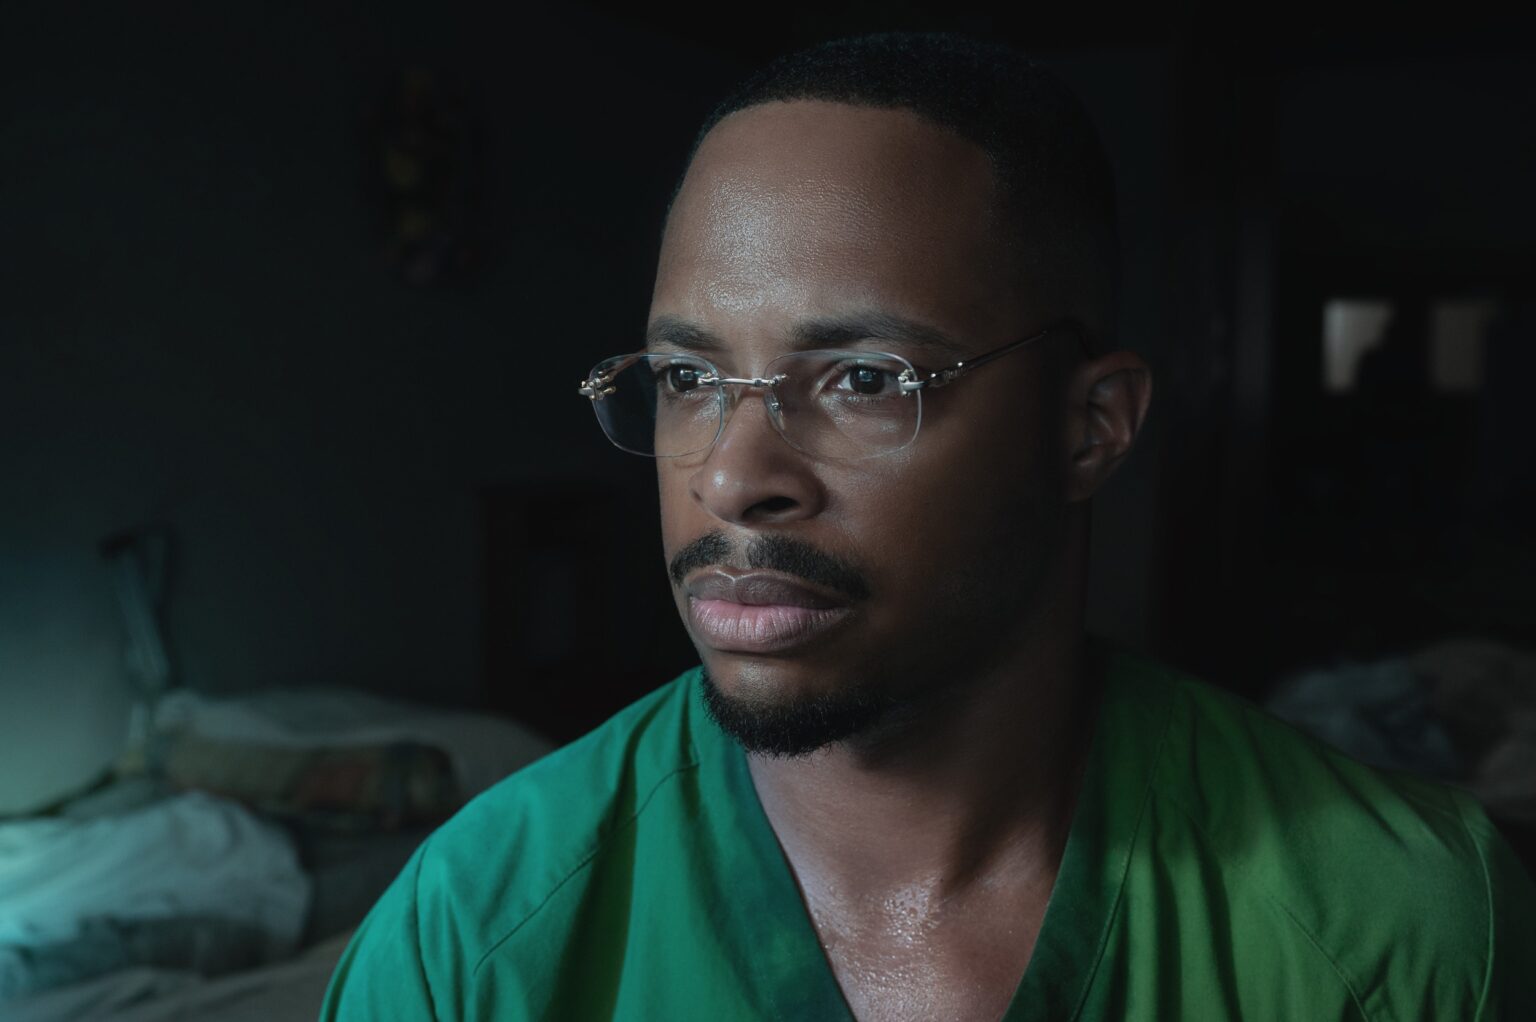 Five Days at Memorial recap Apple TV+: For Dr. Bryant King (played by Cornelius Smith Jr.), the horror is inescapable.